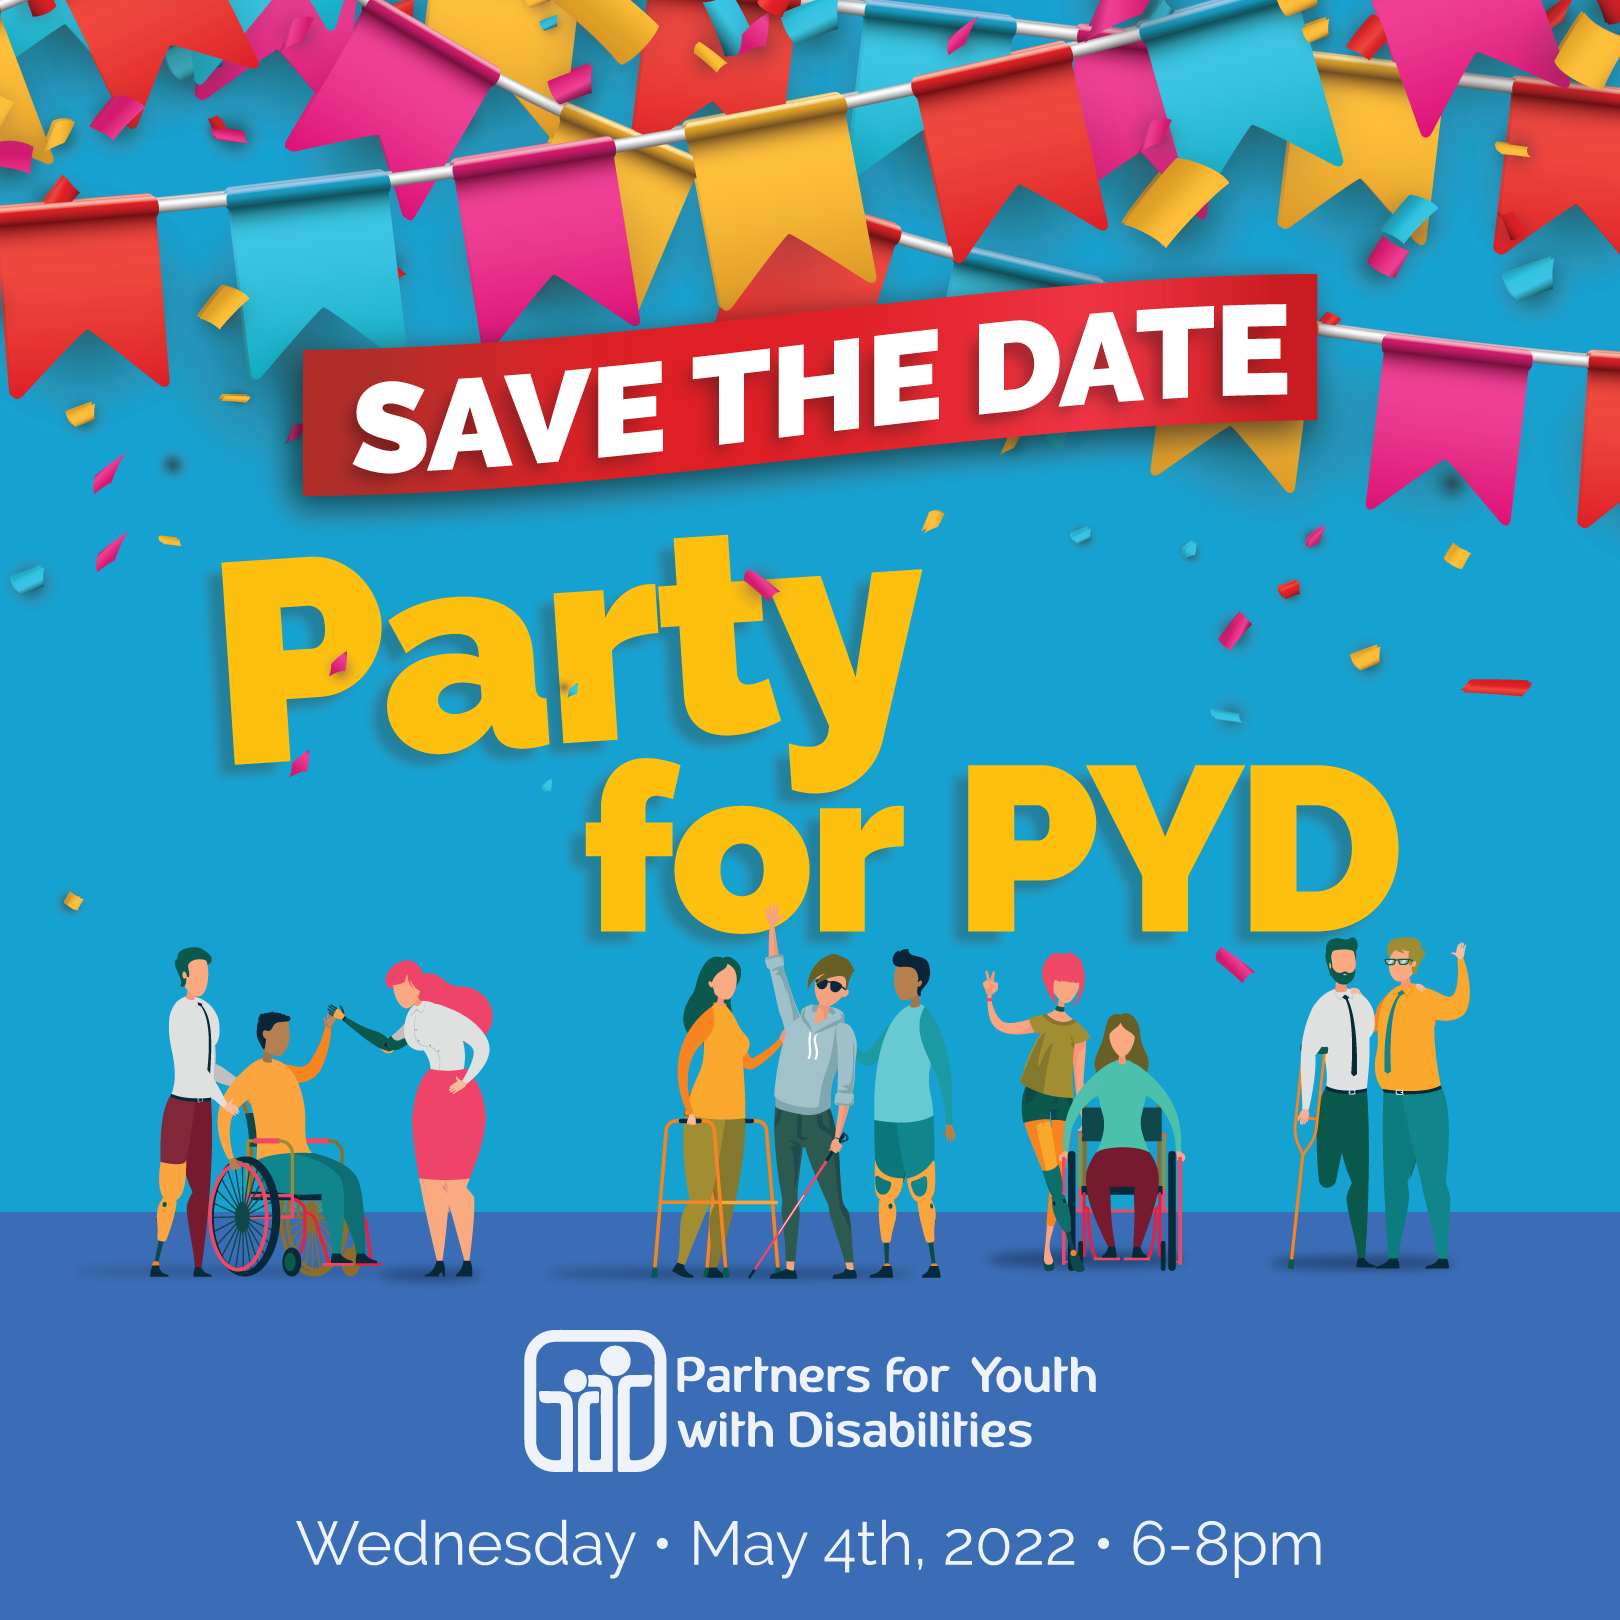 Save the date for Party For PYD